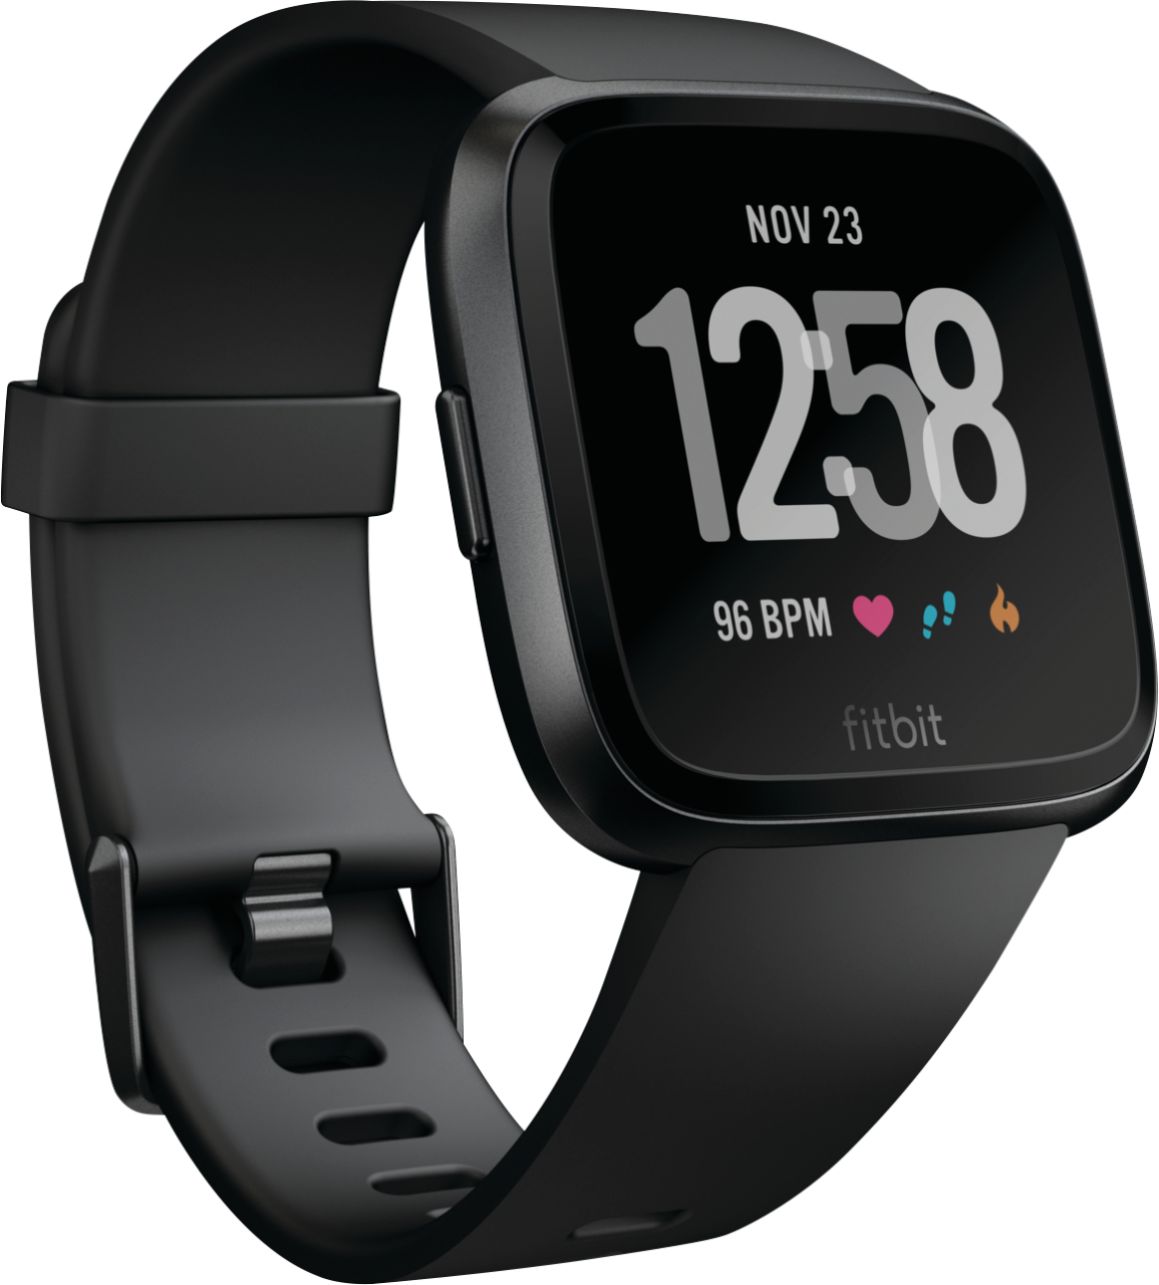 Questions and Answers: Fitbit Versa Smartwatch Black FB504GMBK - Best Buy